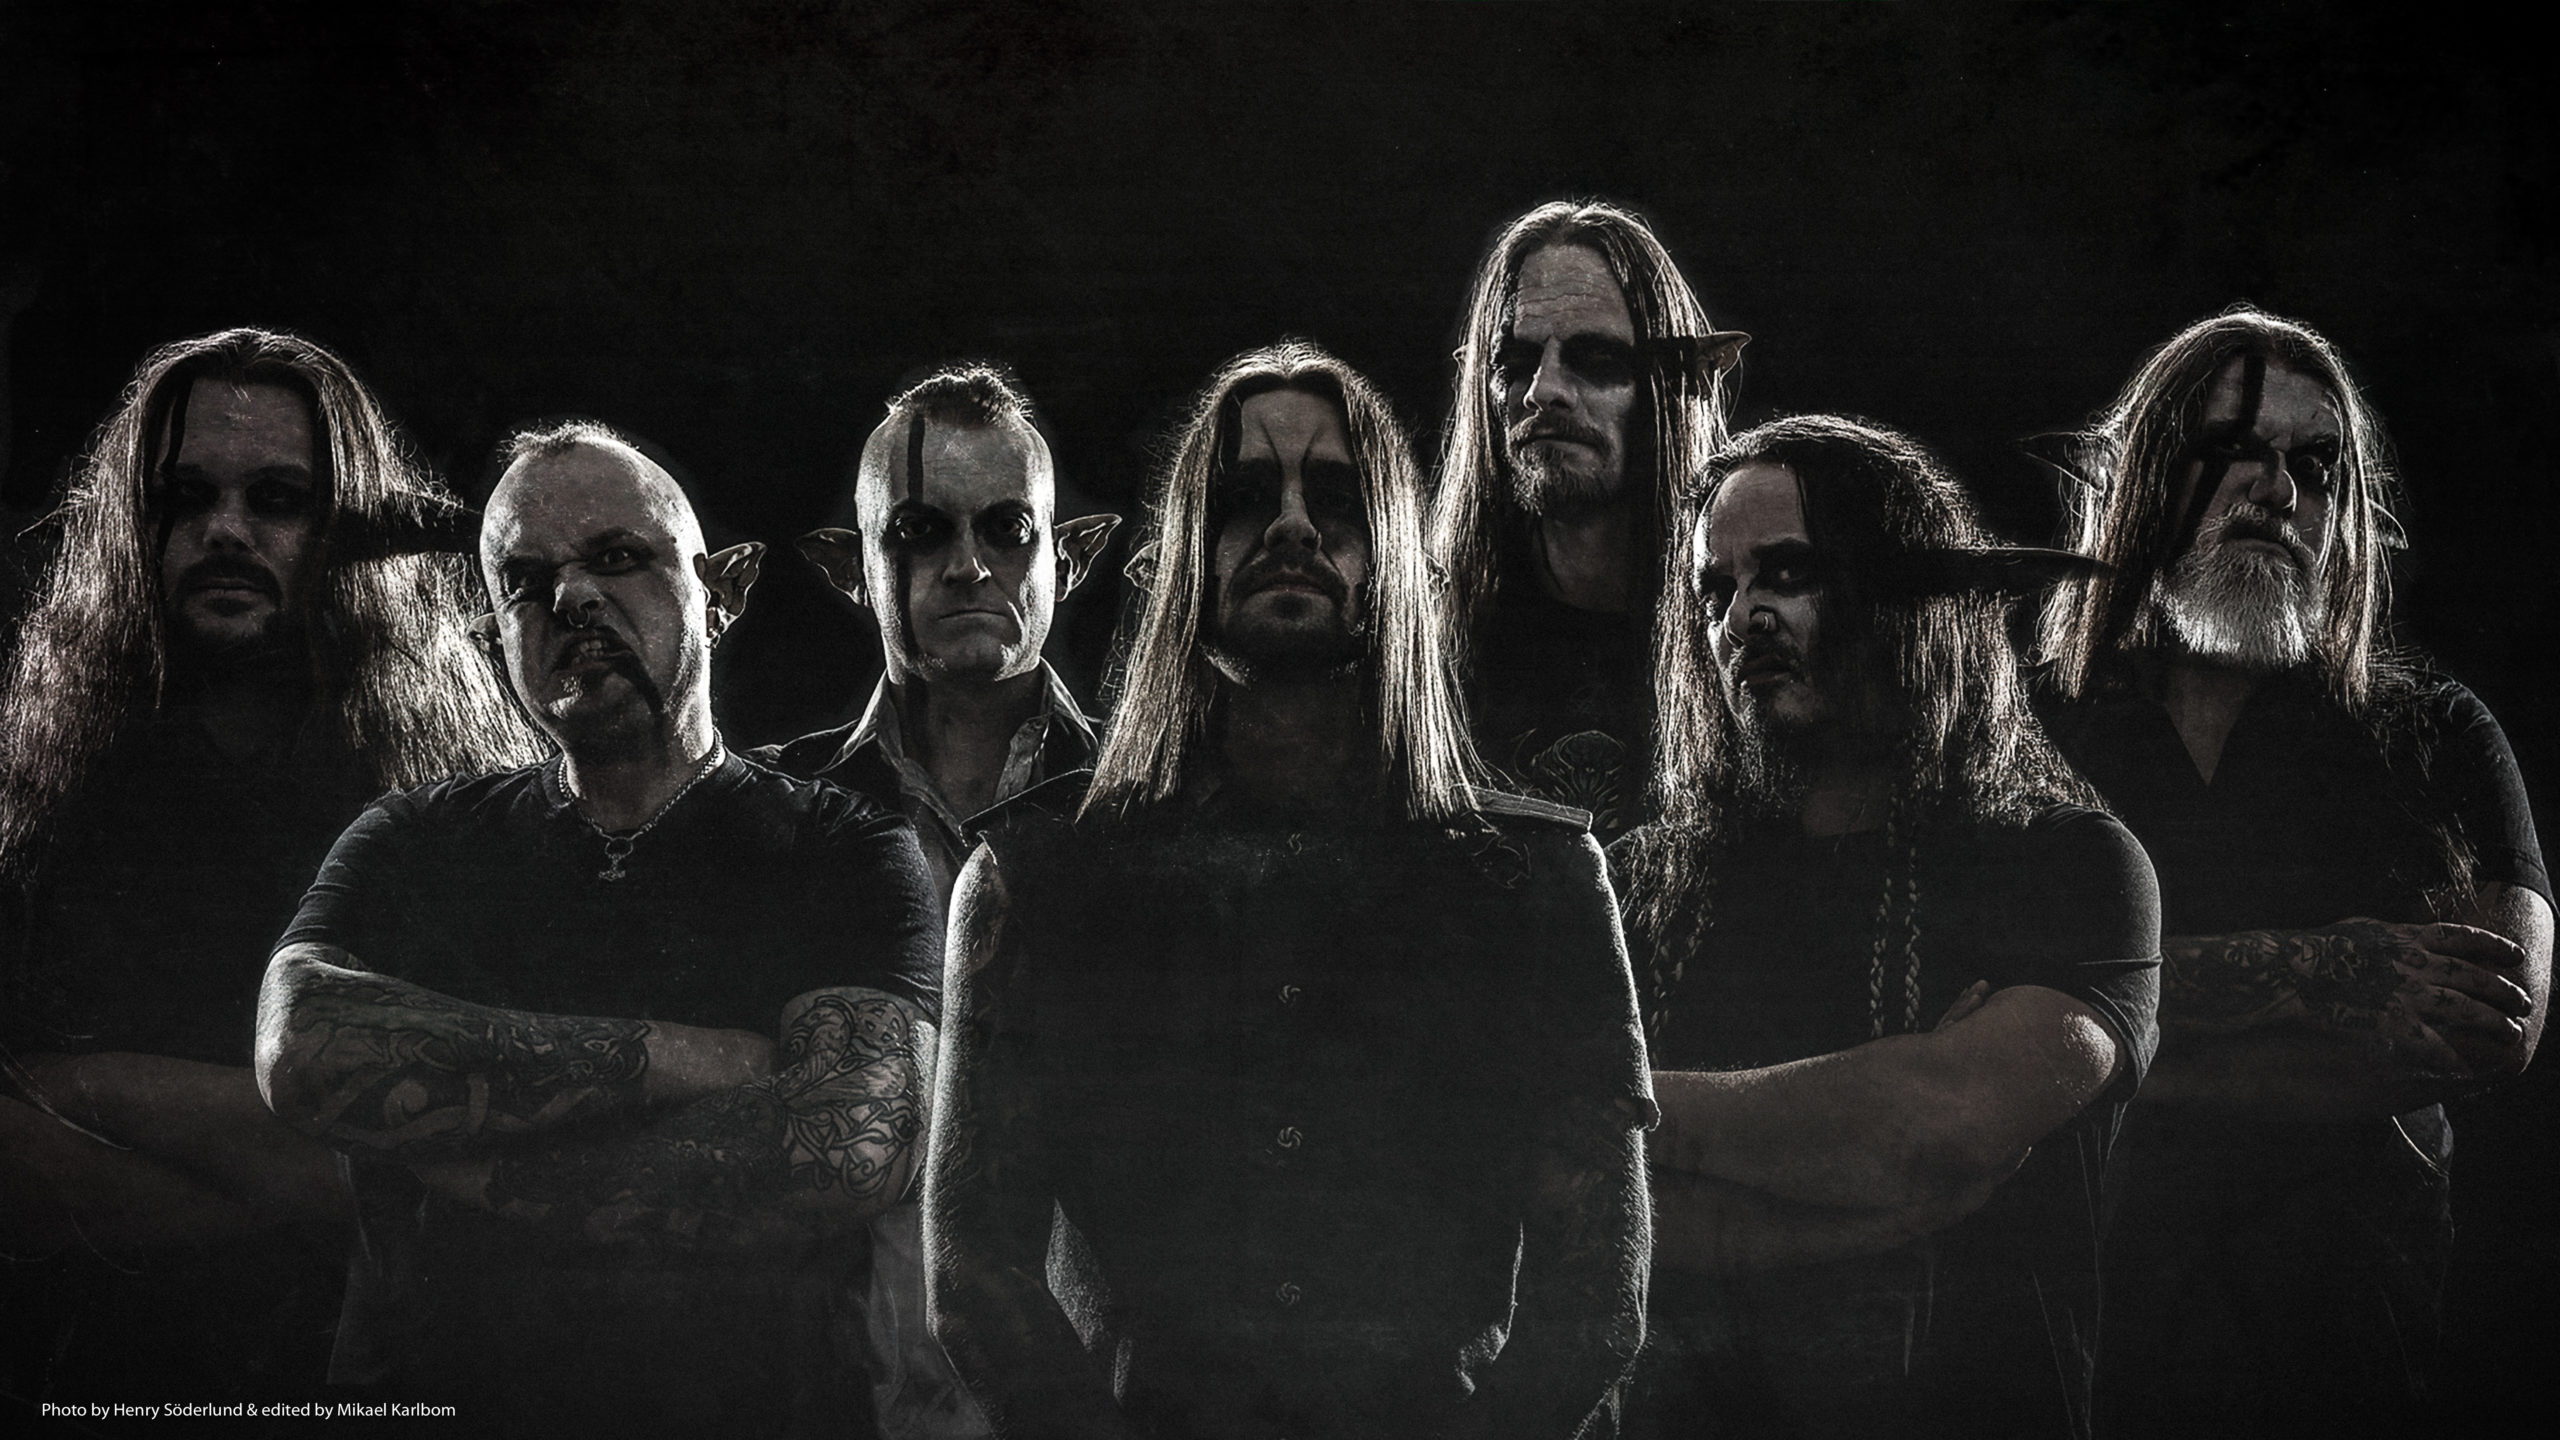 “We had the ideas for the album in our heads for years already” – Interview with Vreth of Finntroll